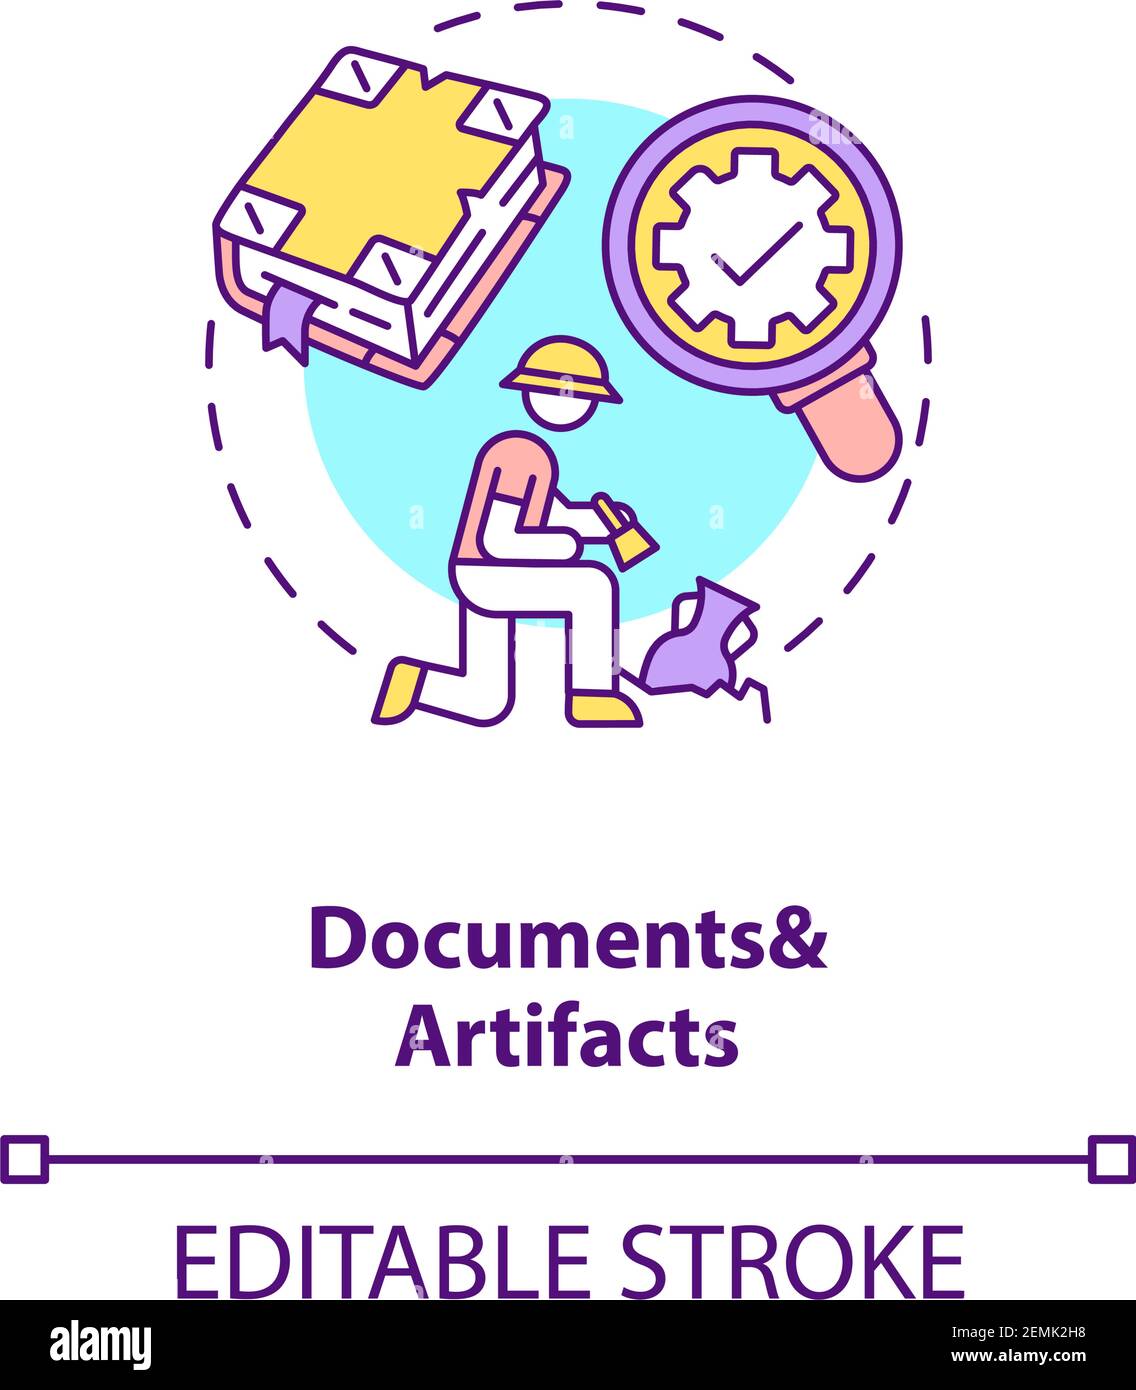 Documents and artifacts analysis concept icon Stock Vector